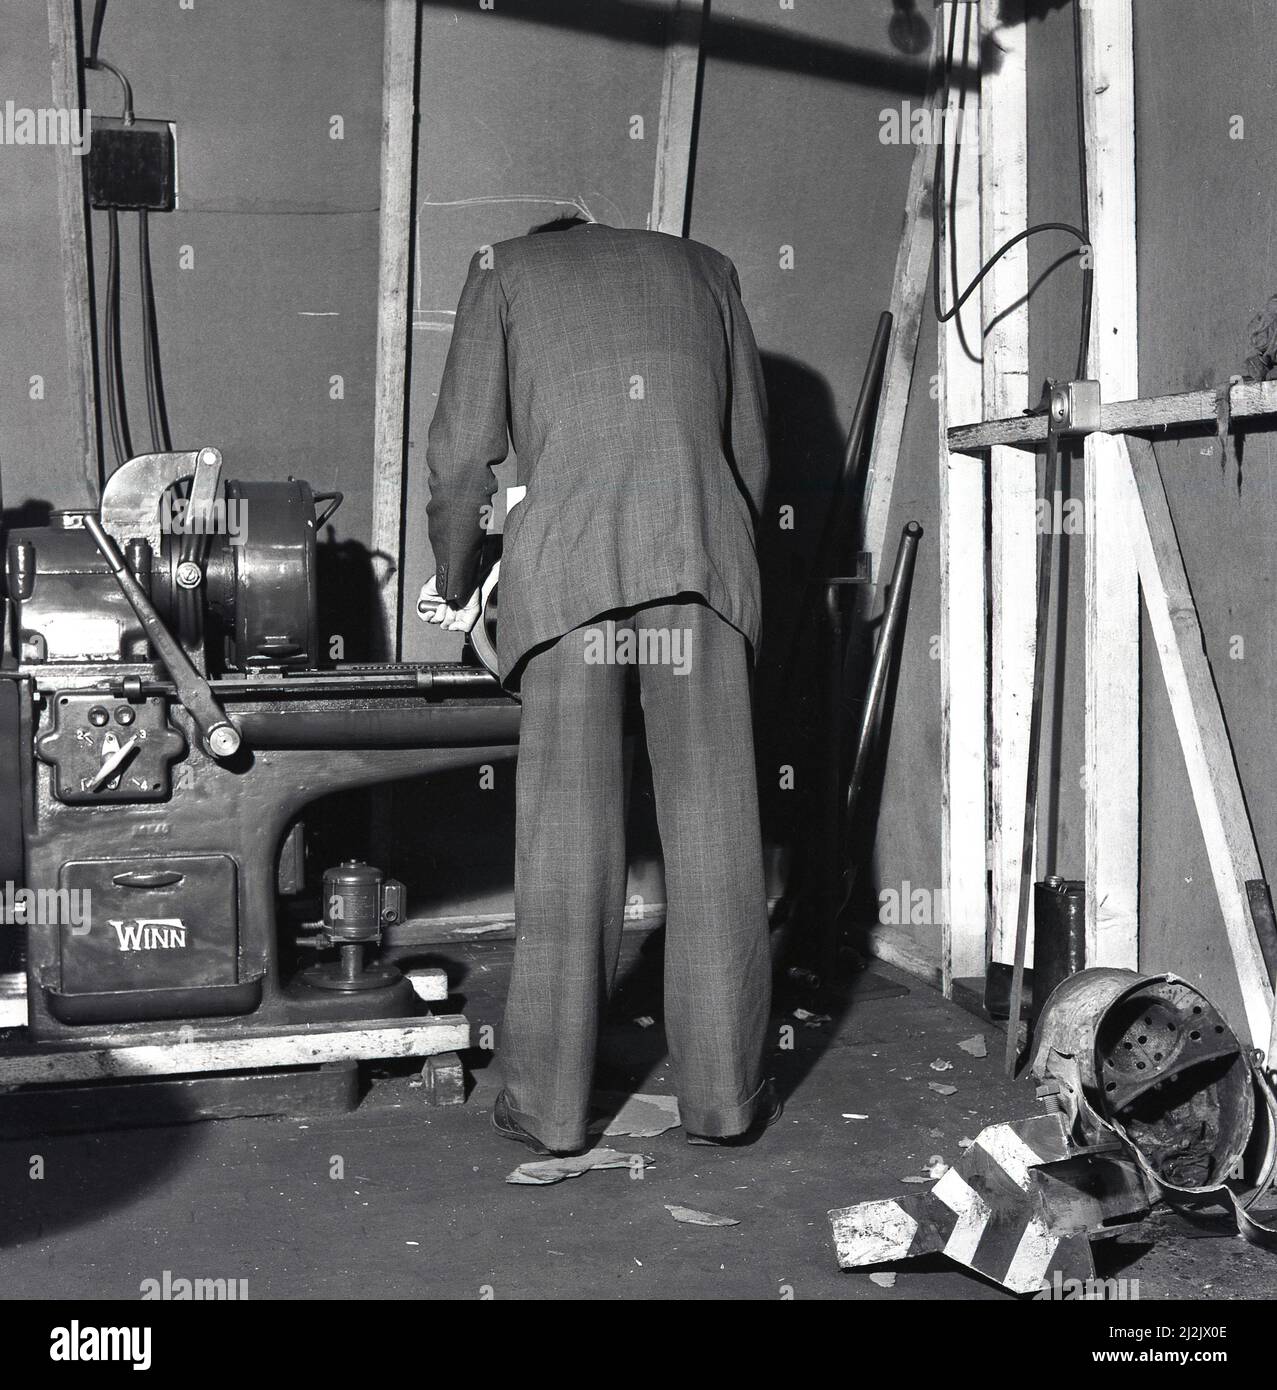 1950s, historical, in a internal construction site, a man in a suit using a bench type machine tool, made by Winn, possibly for wood working, Port Talbot, Wales, UK. Stock Photo